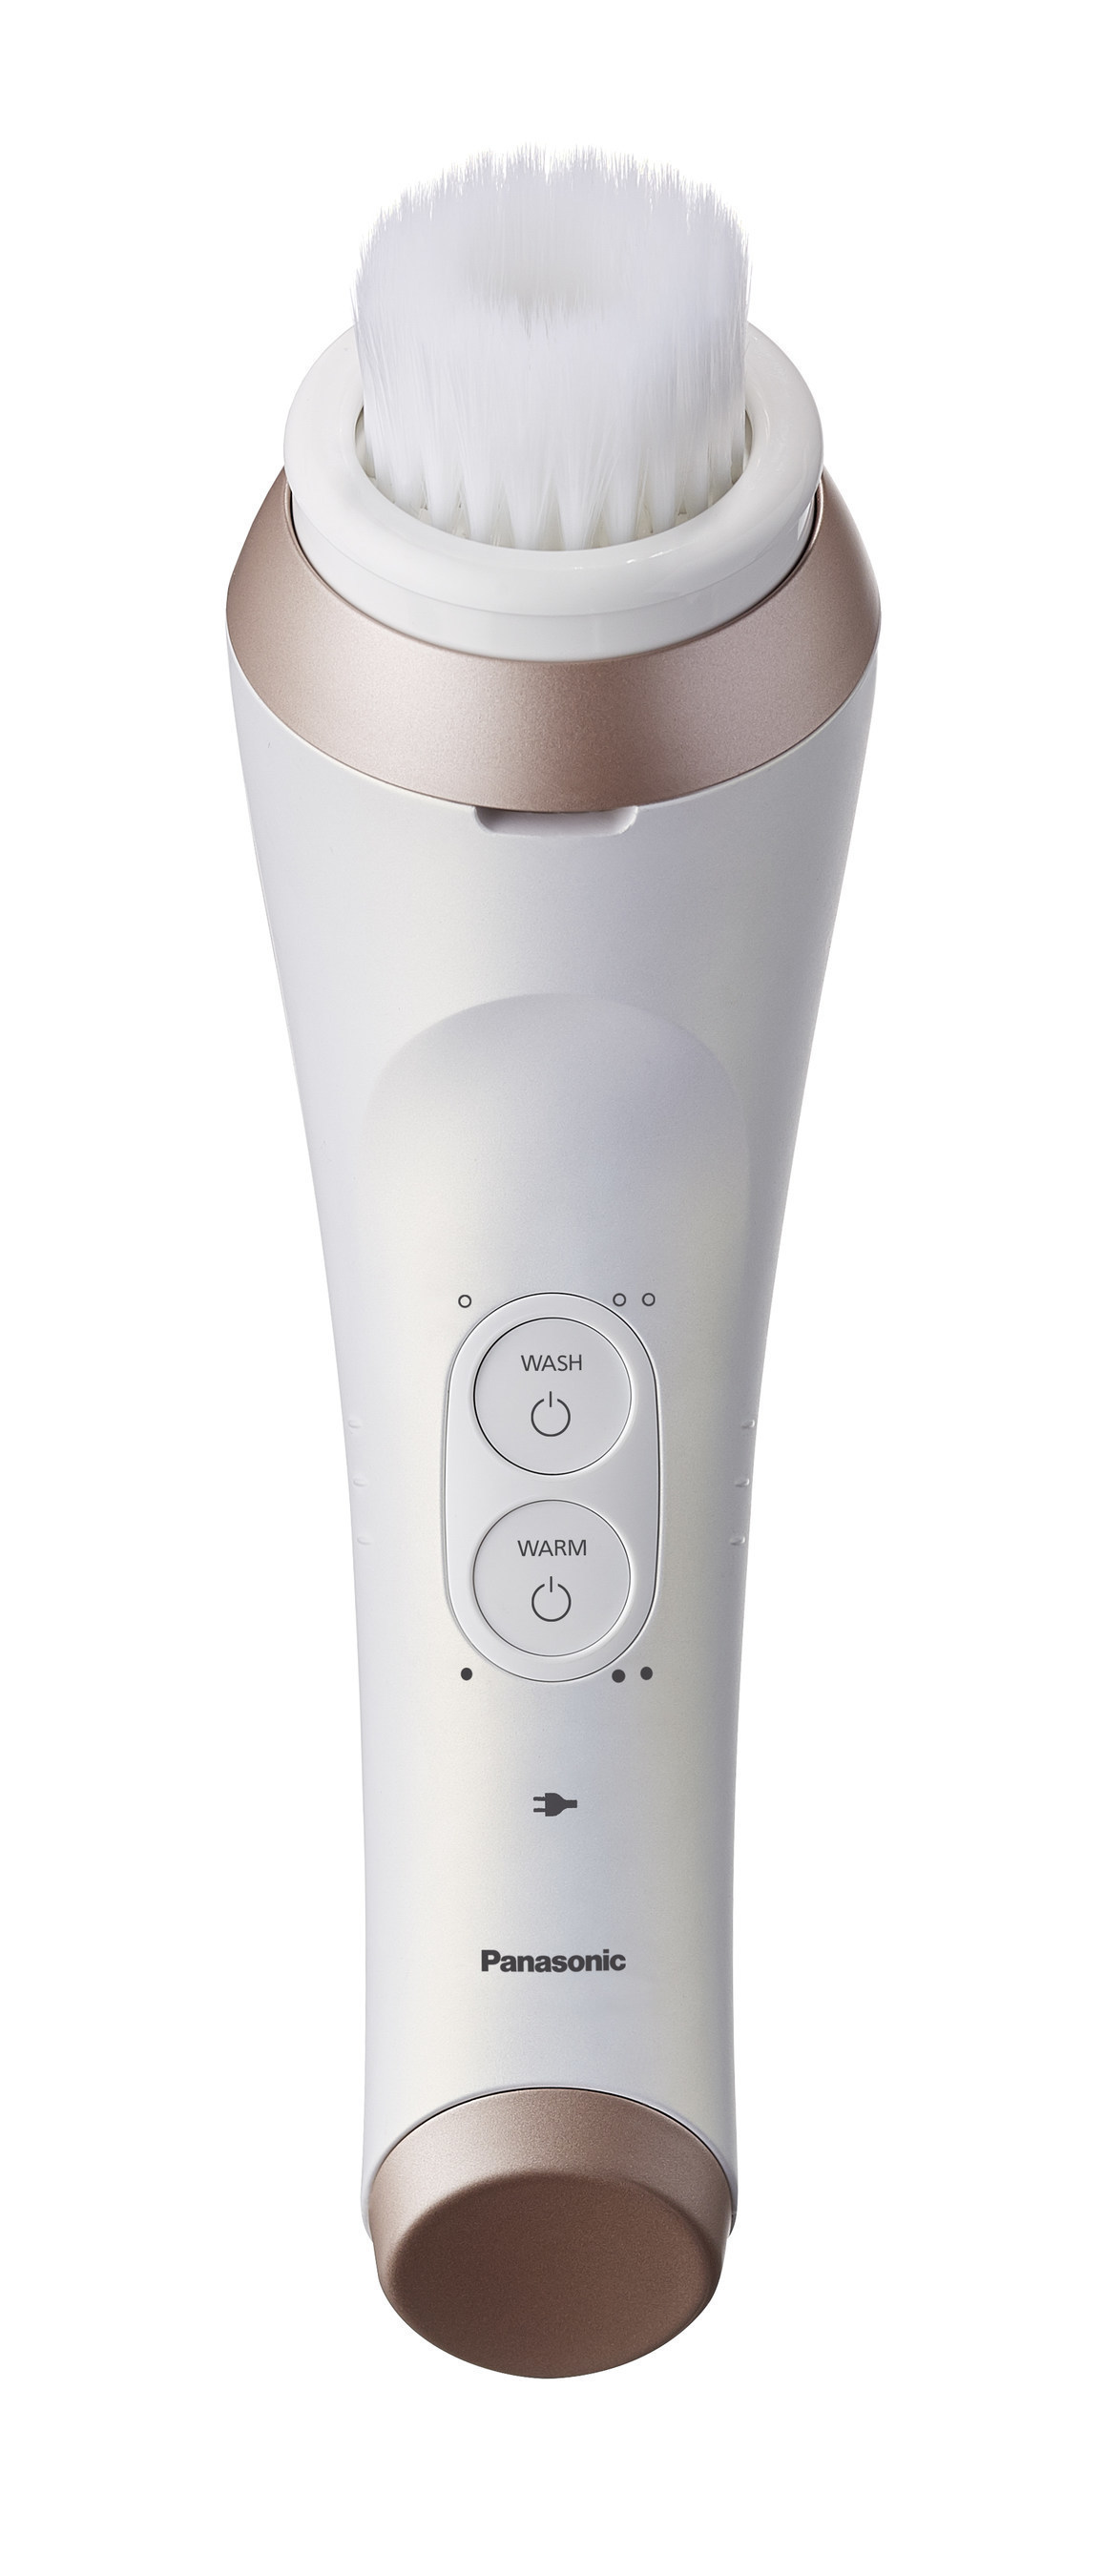 Panasonic Launches New Japanese-Style Cleansing Tool